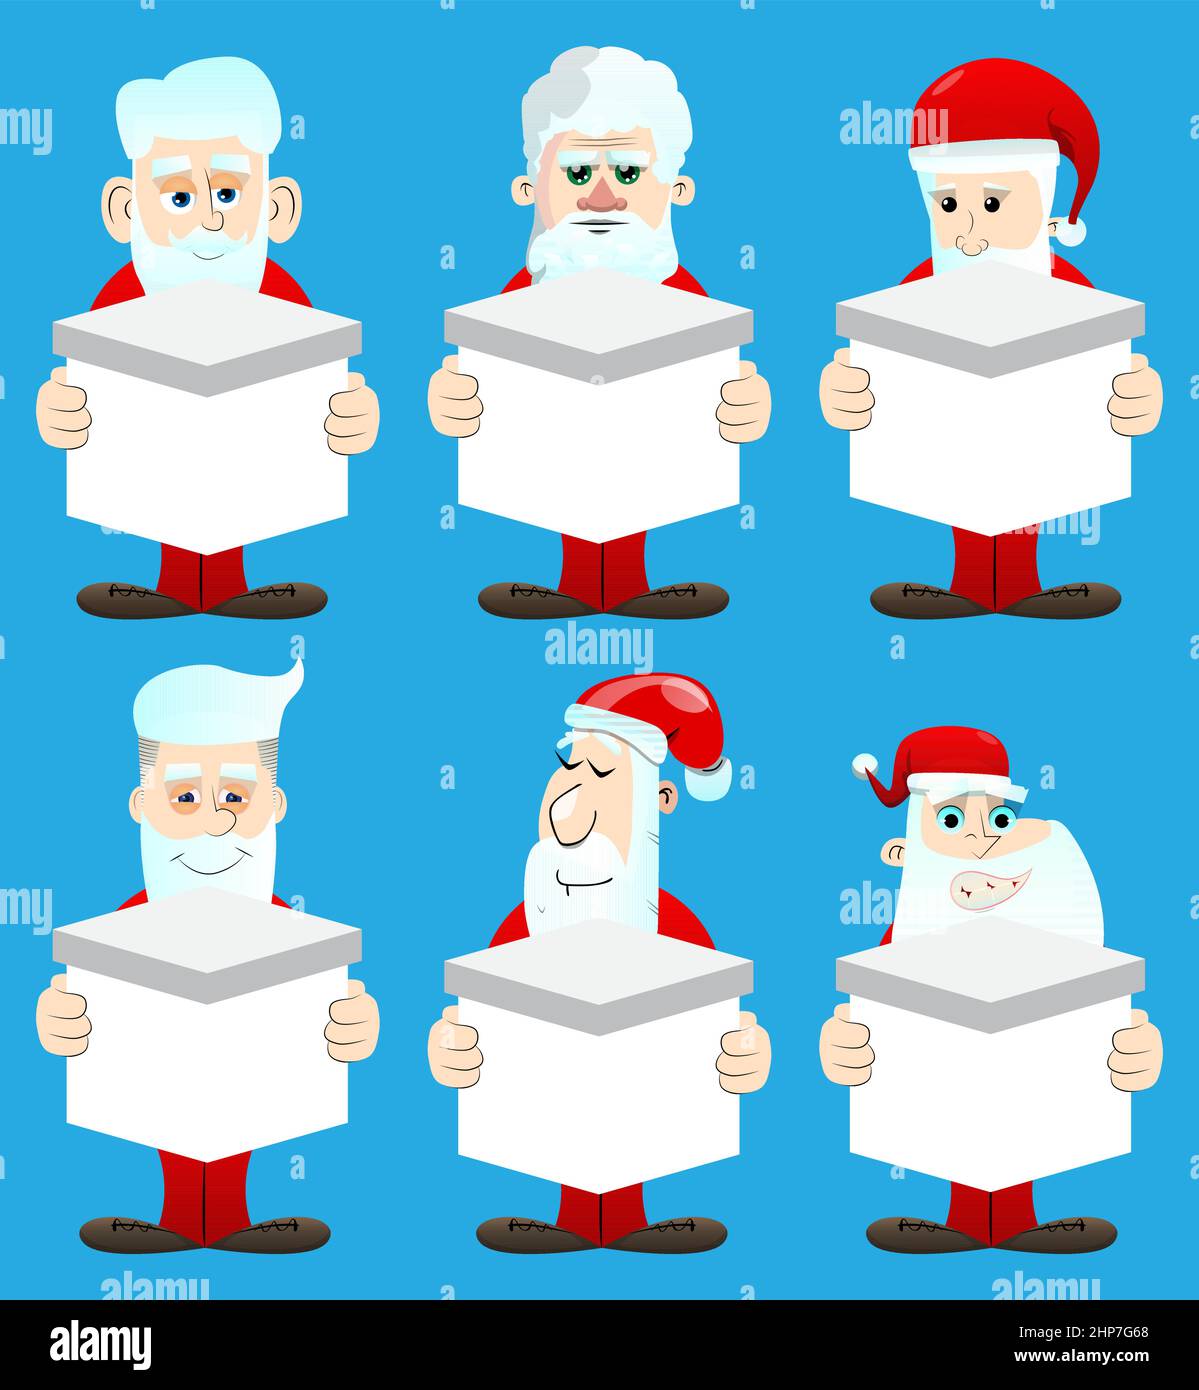 Santa Claus in his red clothes with white beard holding white box Stock Vector